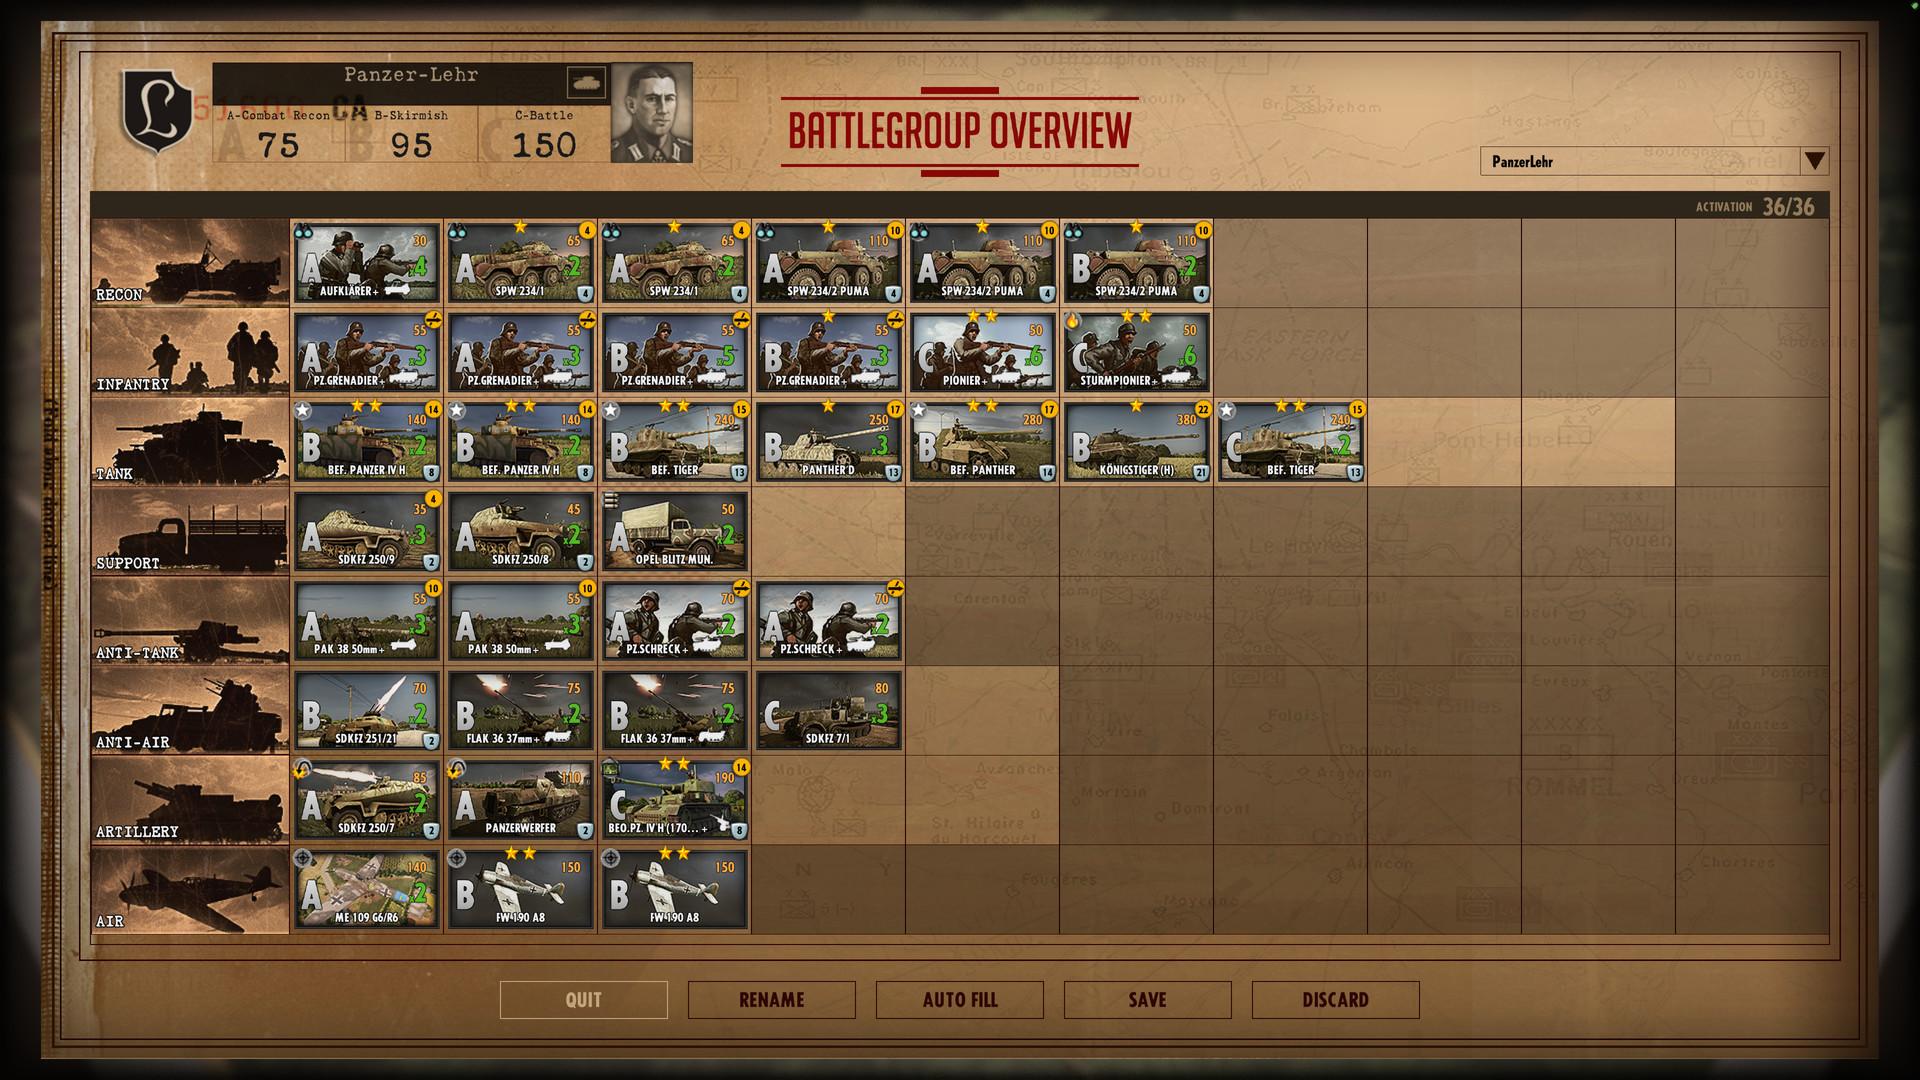 Screenshot №6 from game Steel Division: Normandy 44